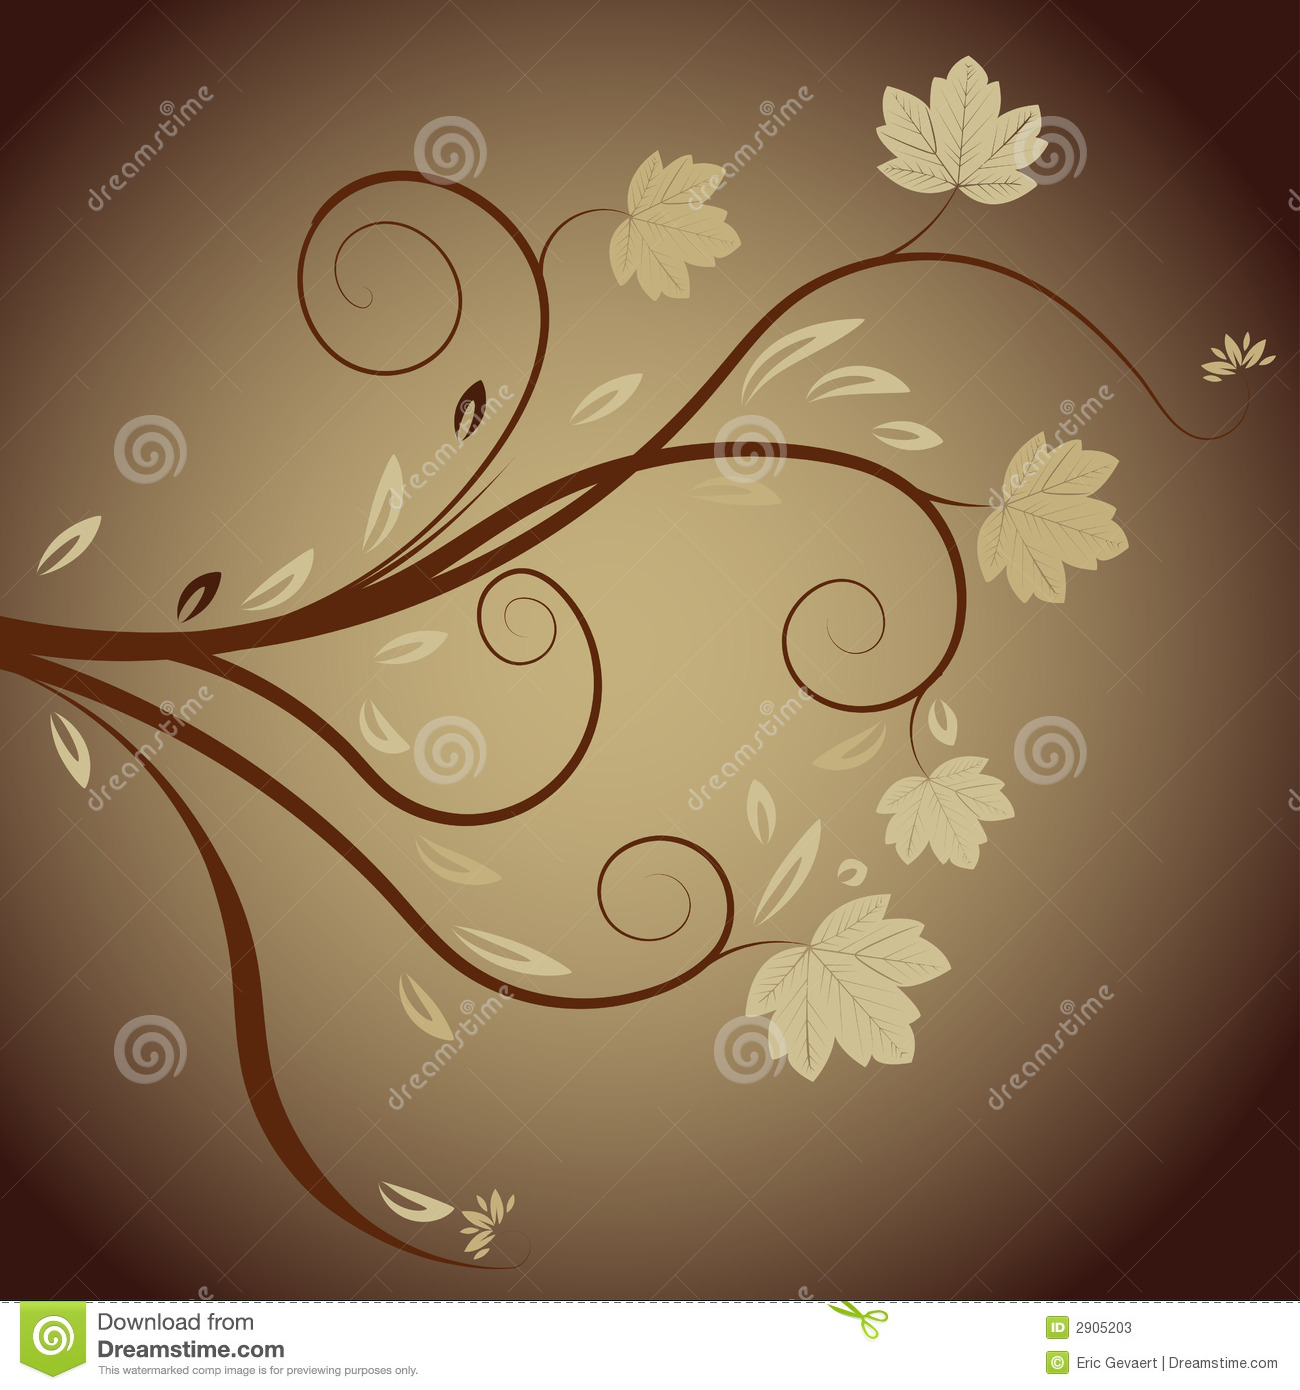 9 Design Abstract Floral Fall Images